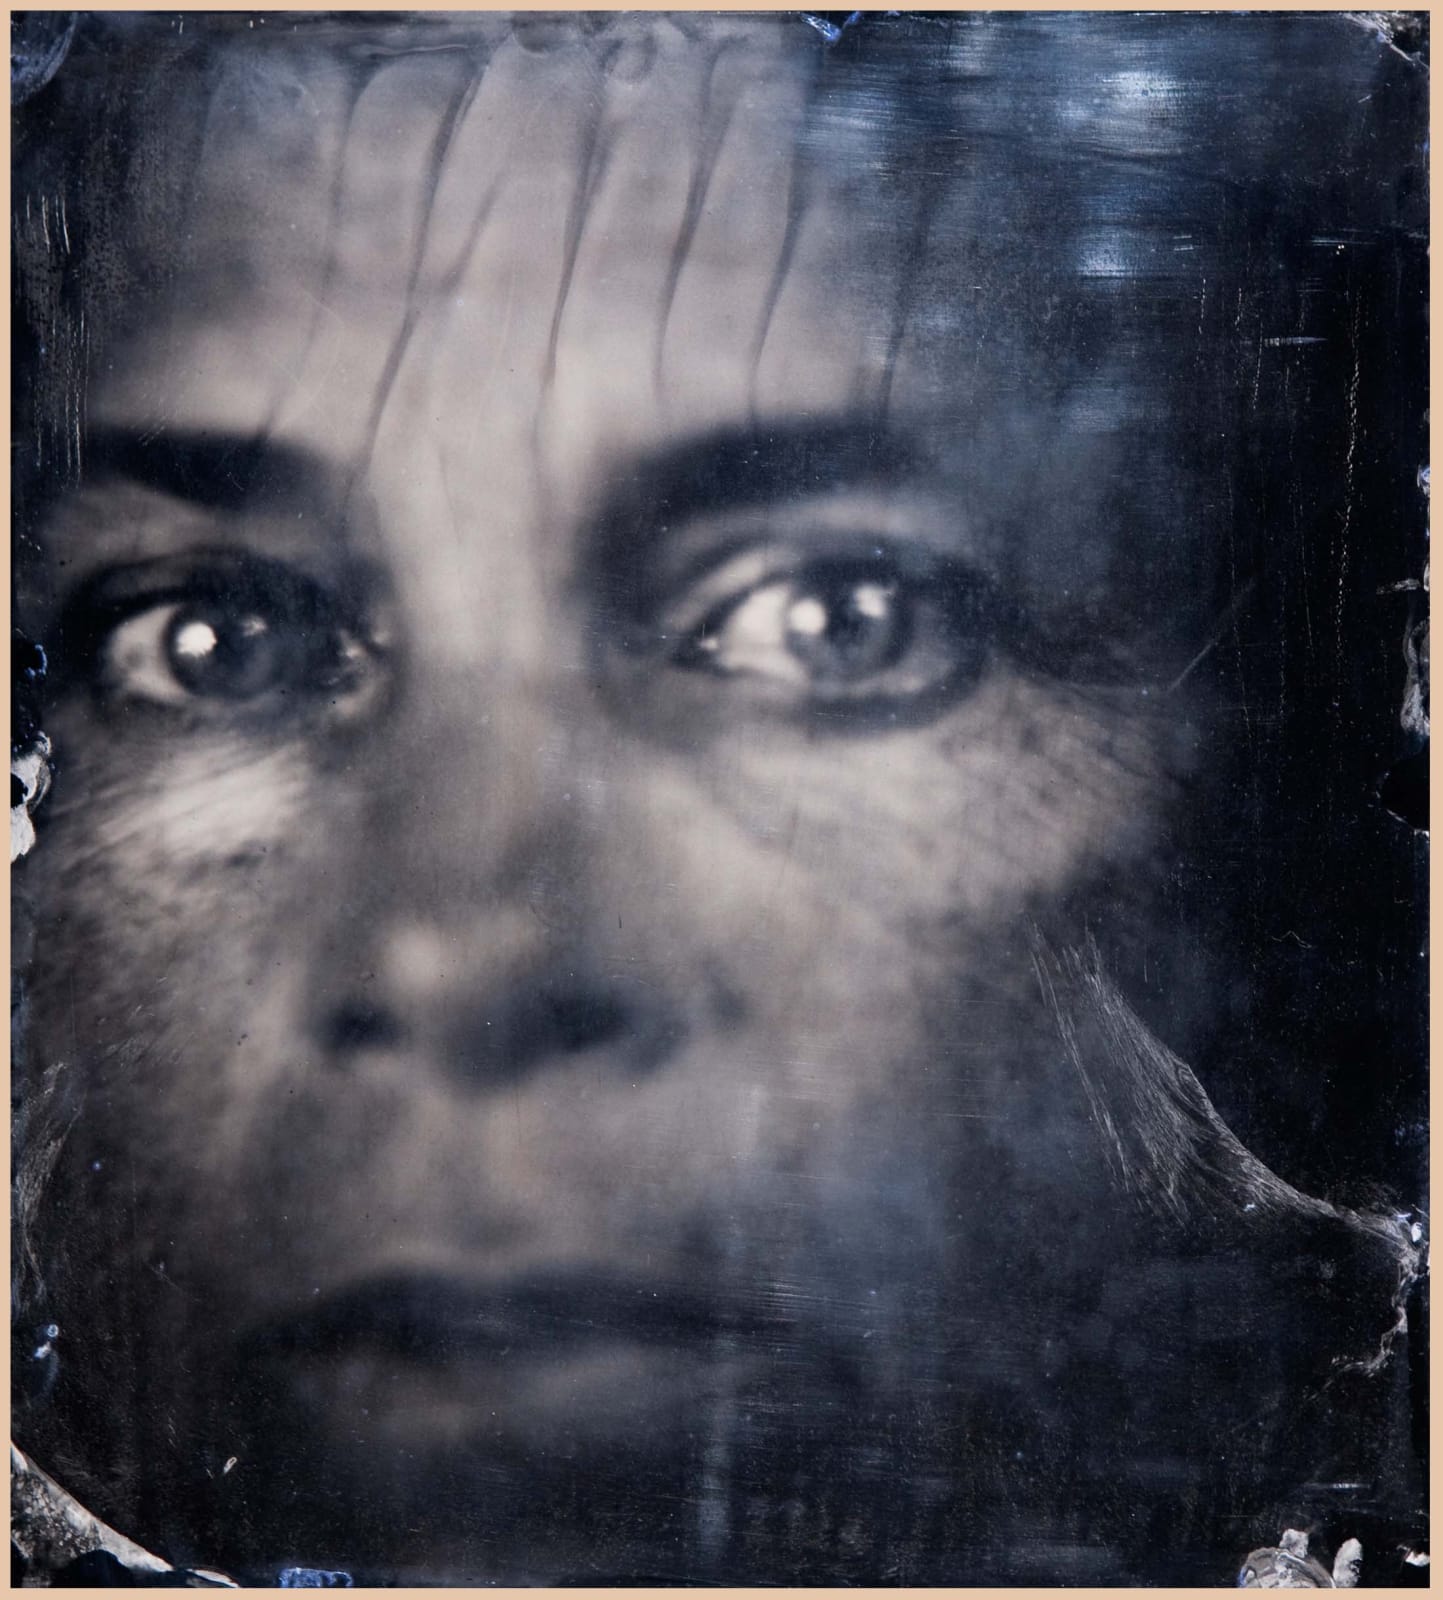 Sally Mann self-portrait ambrotype, from the Upon Reflection exhibition